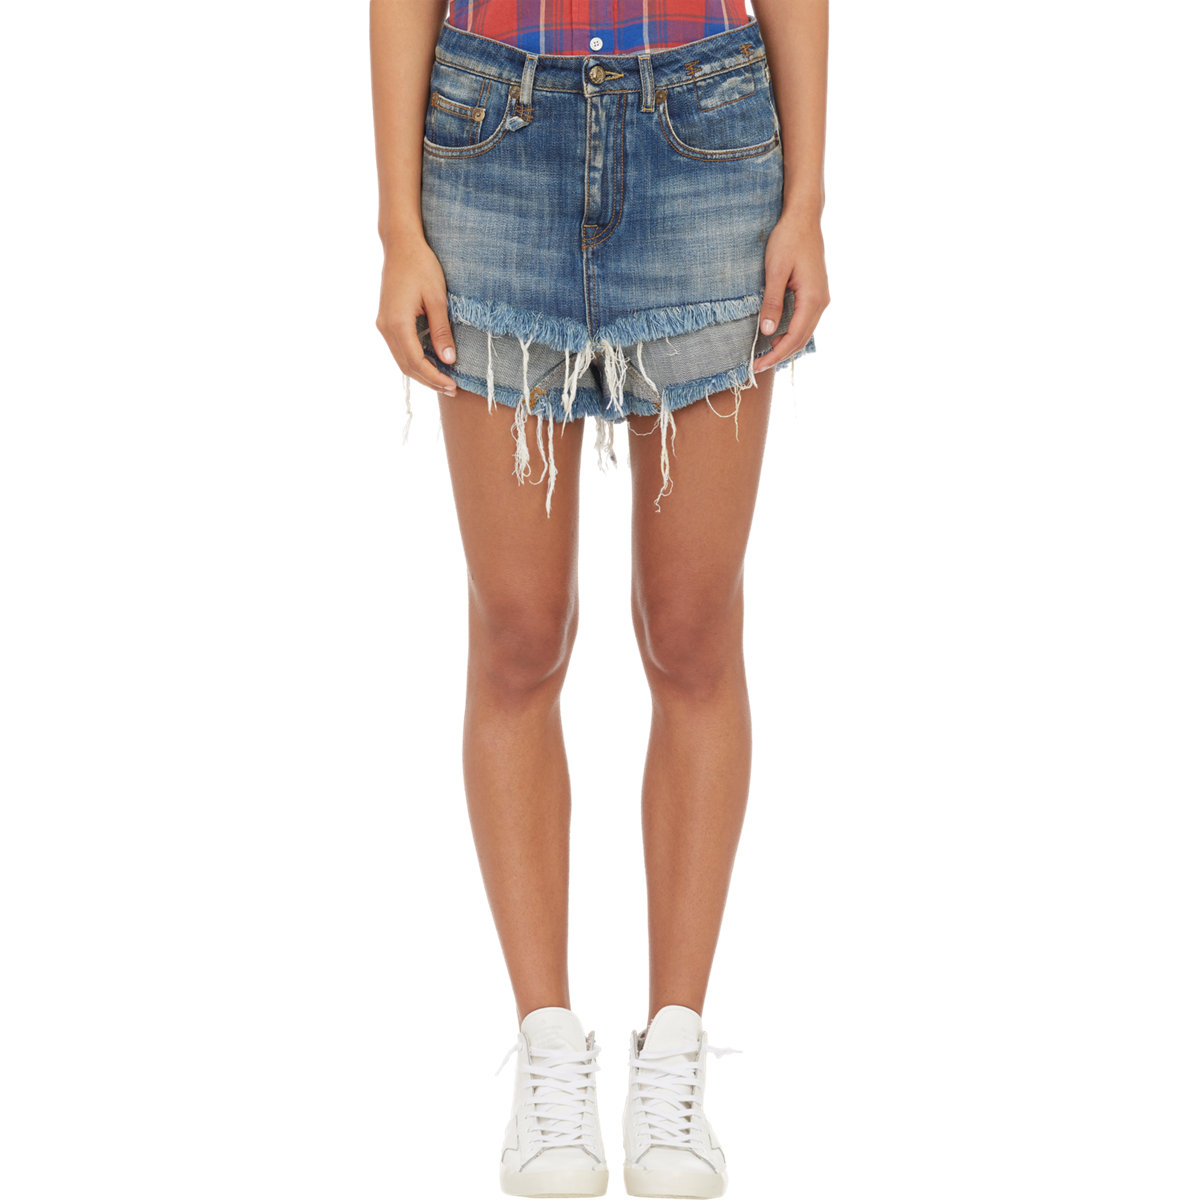 How to make cut off shorts   refinery29